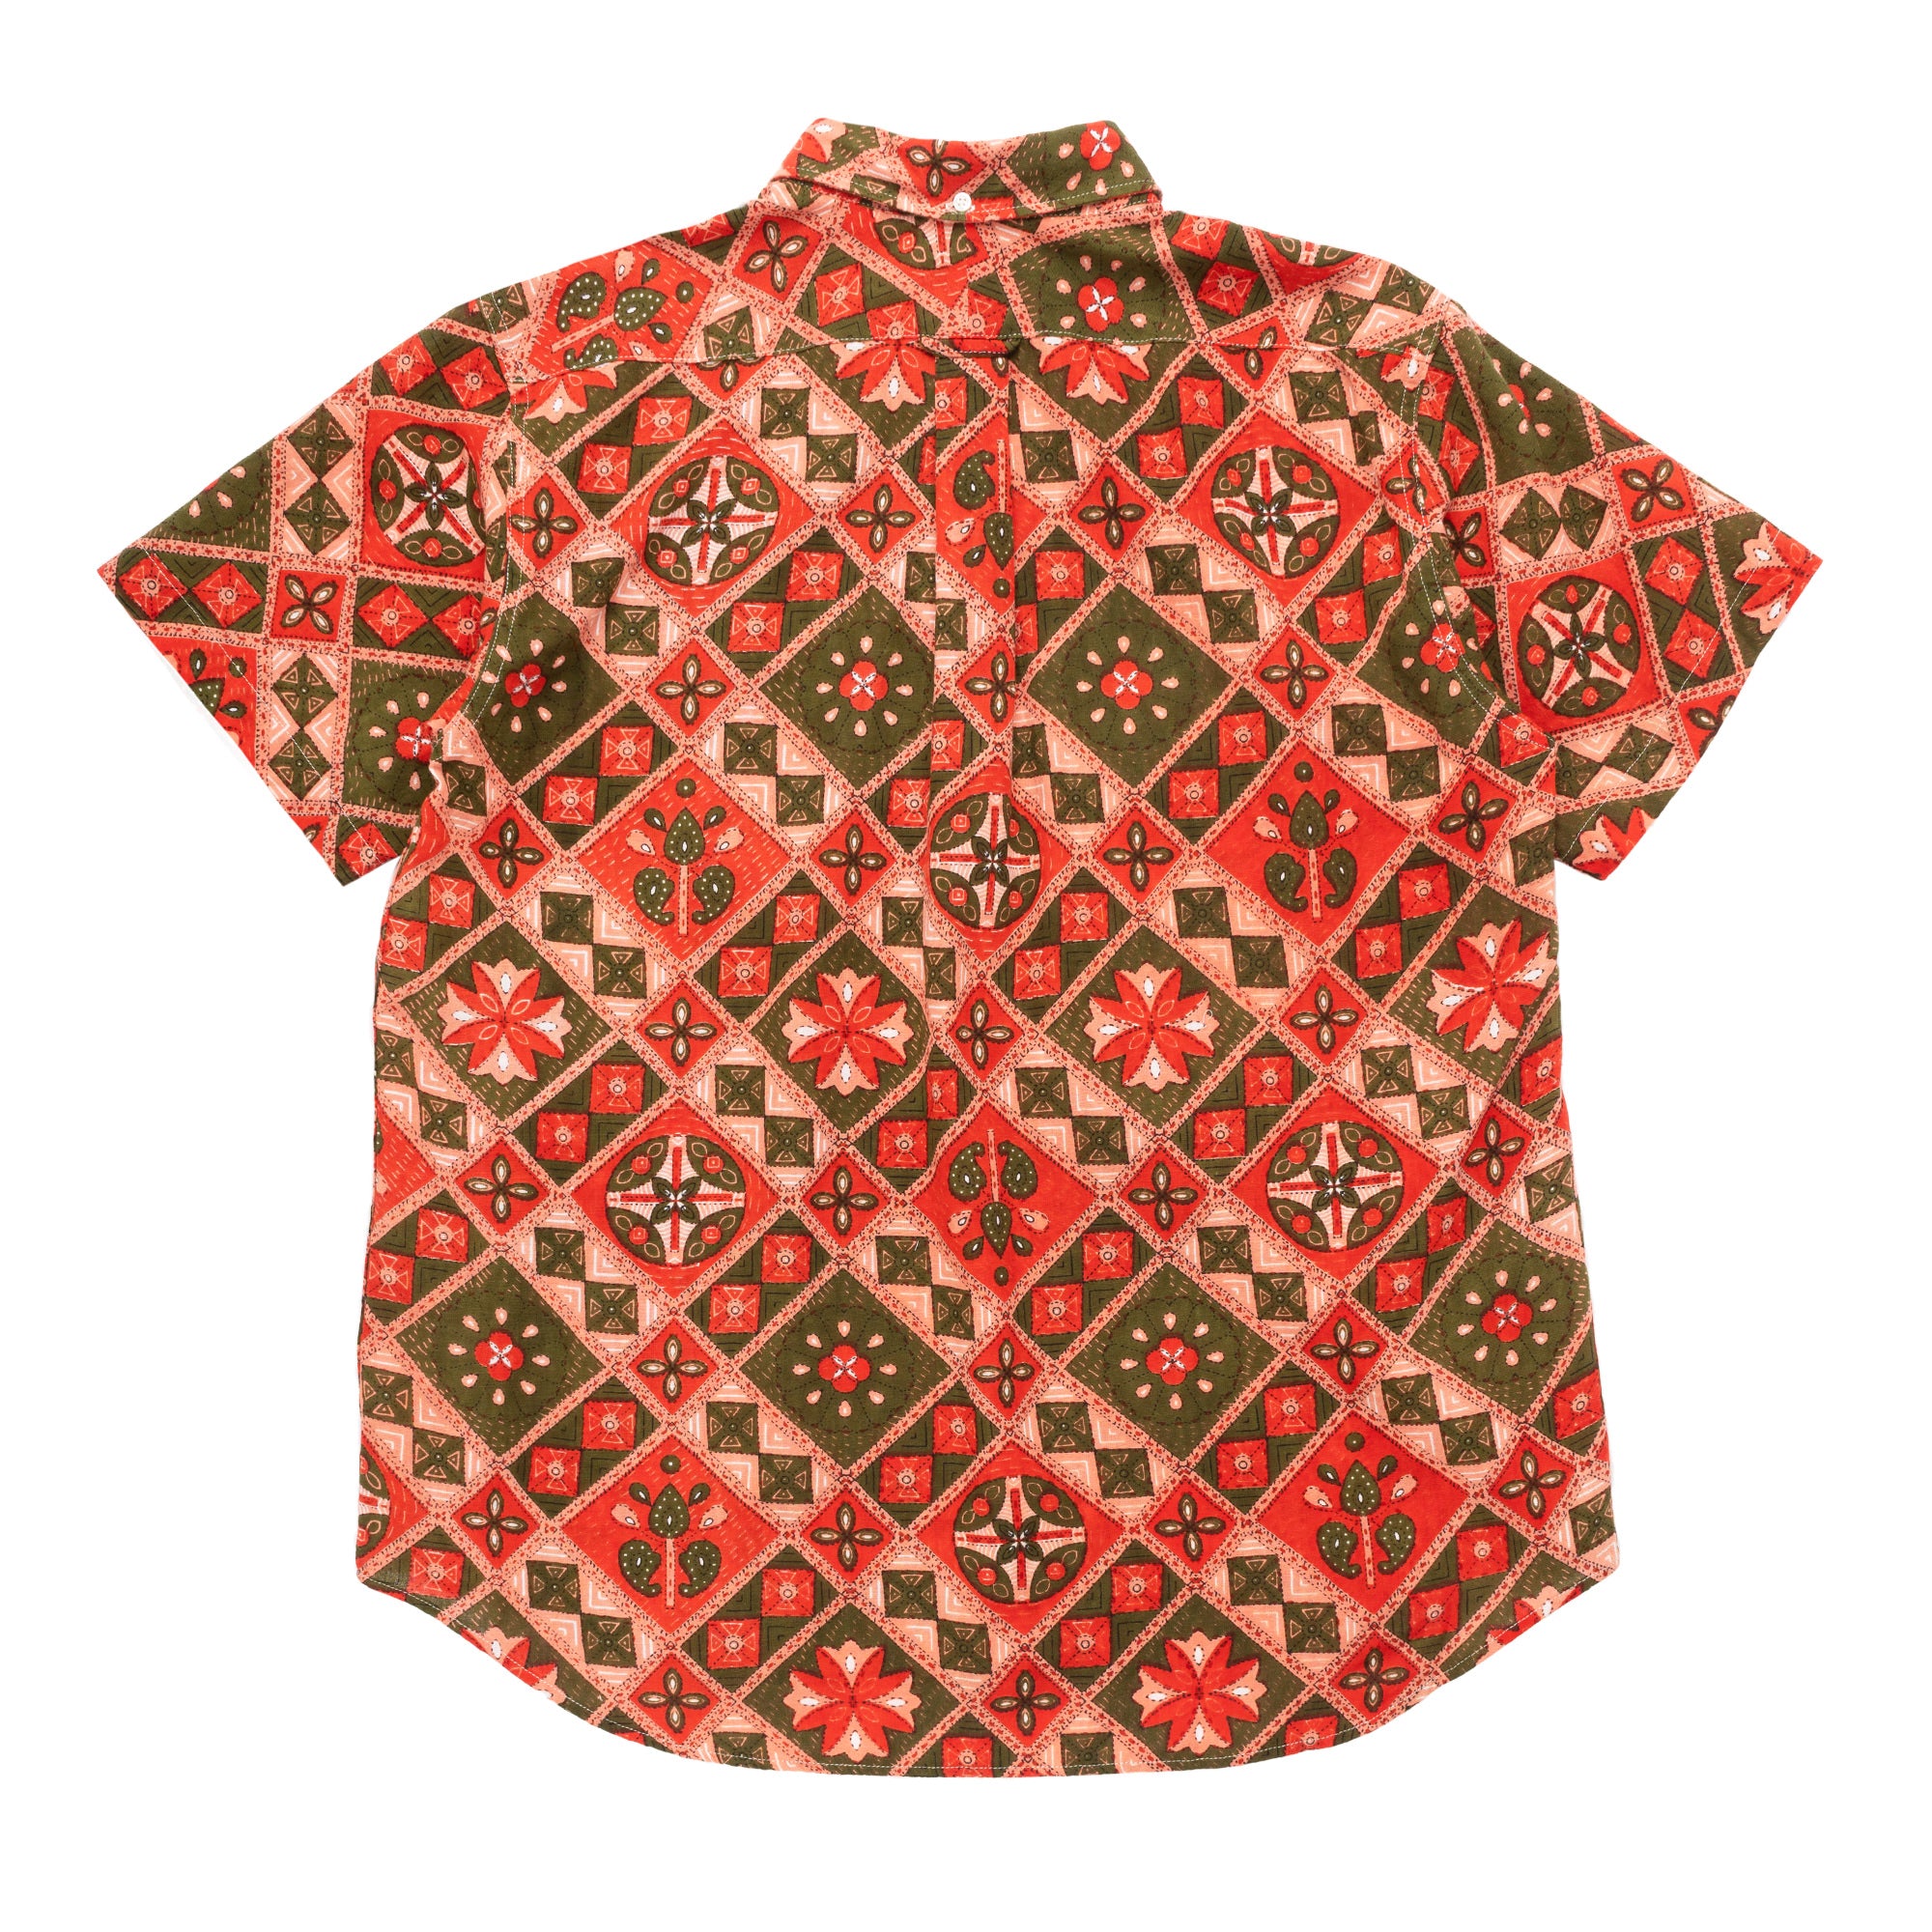 Popover BD Shirt 23S1A003 Pink/Olive Cotton Ethno Print